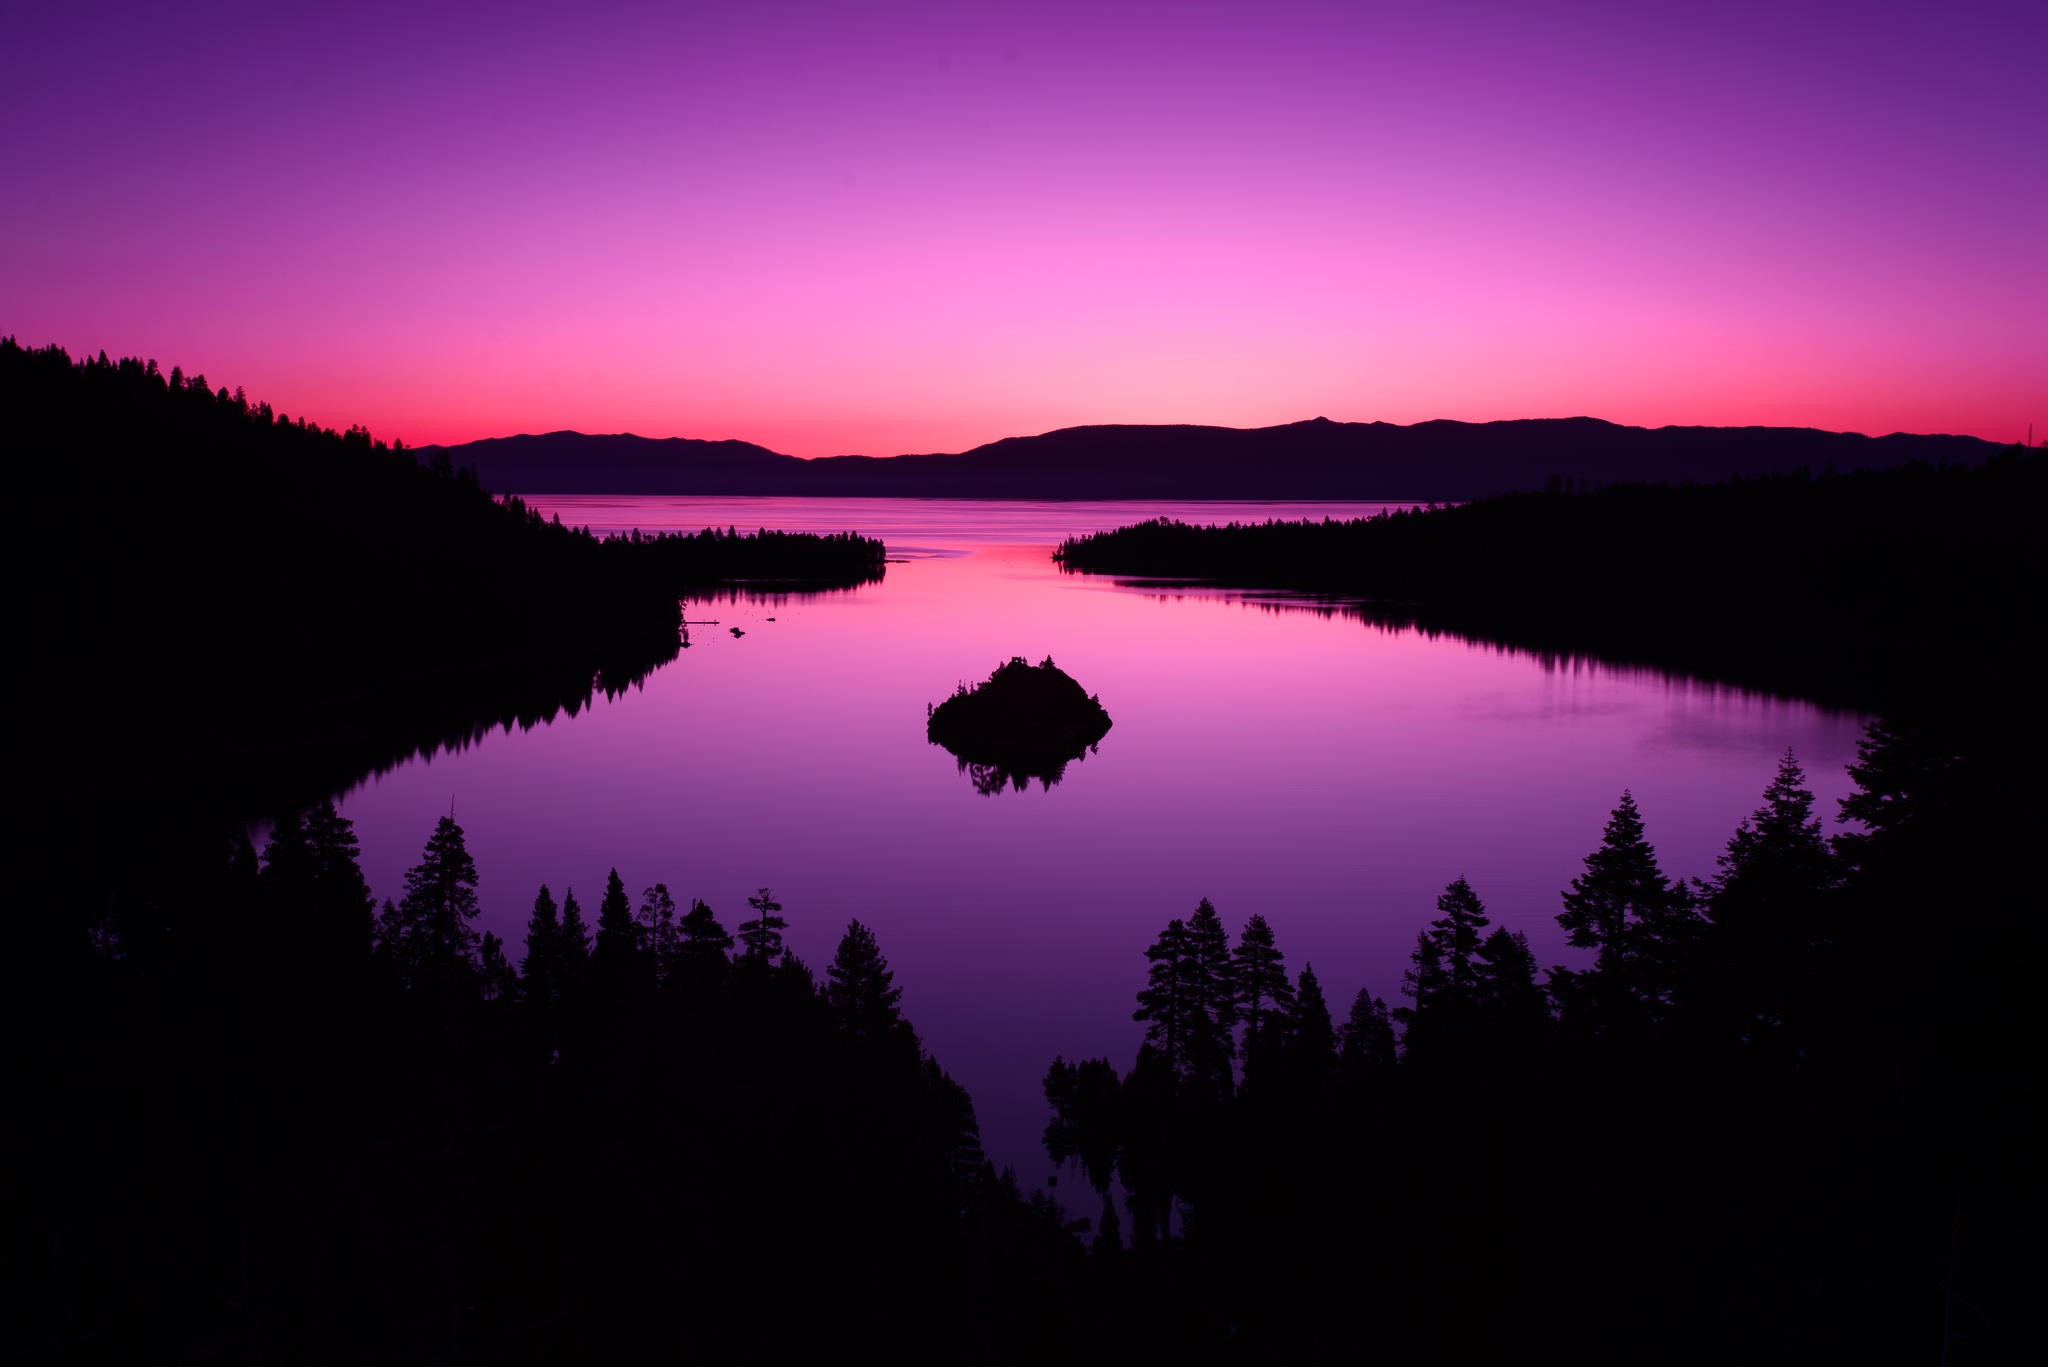 General 2048x1367 photography nature landscape lake hills mountains sky pink forest dark island spruce purple sky purple low light